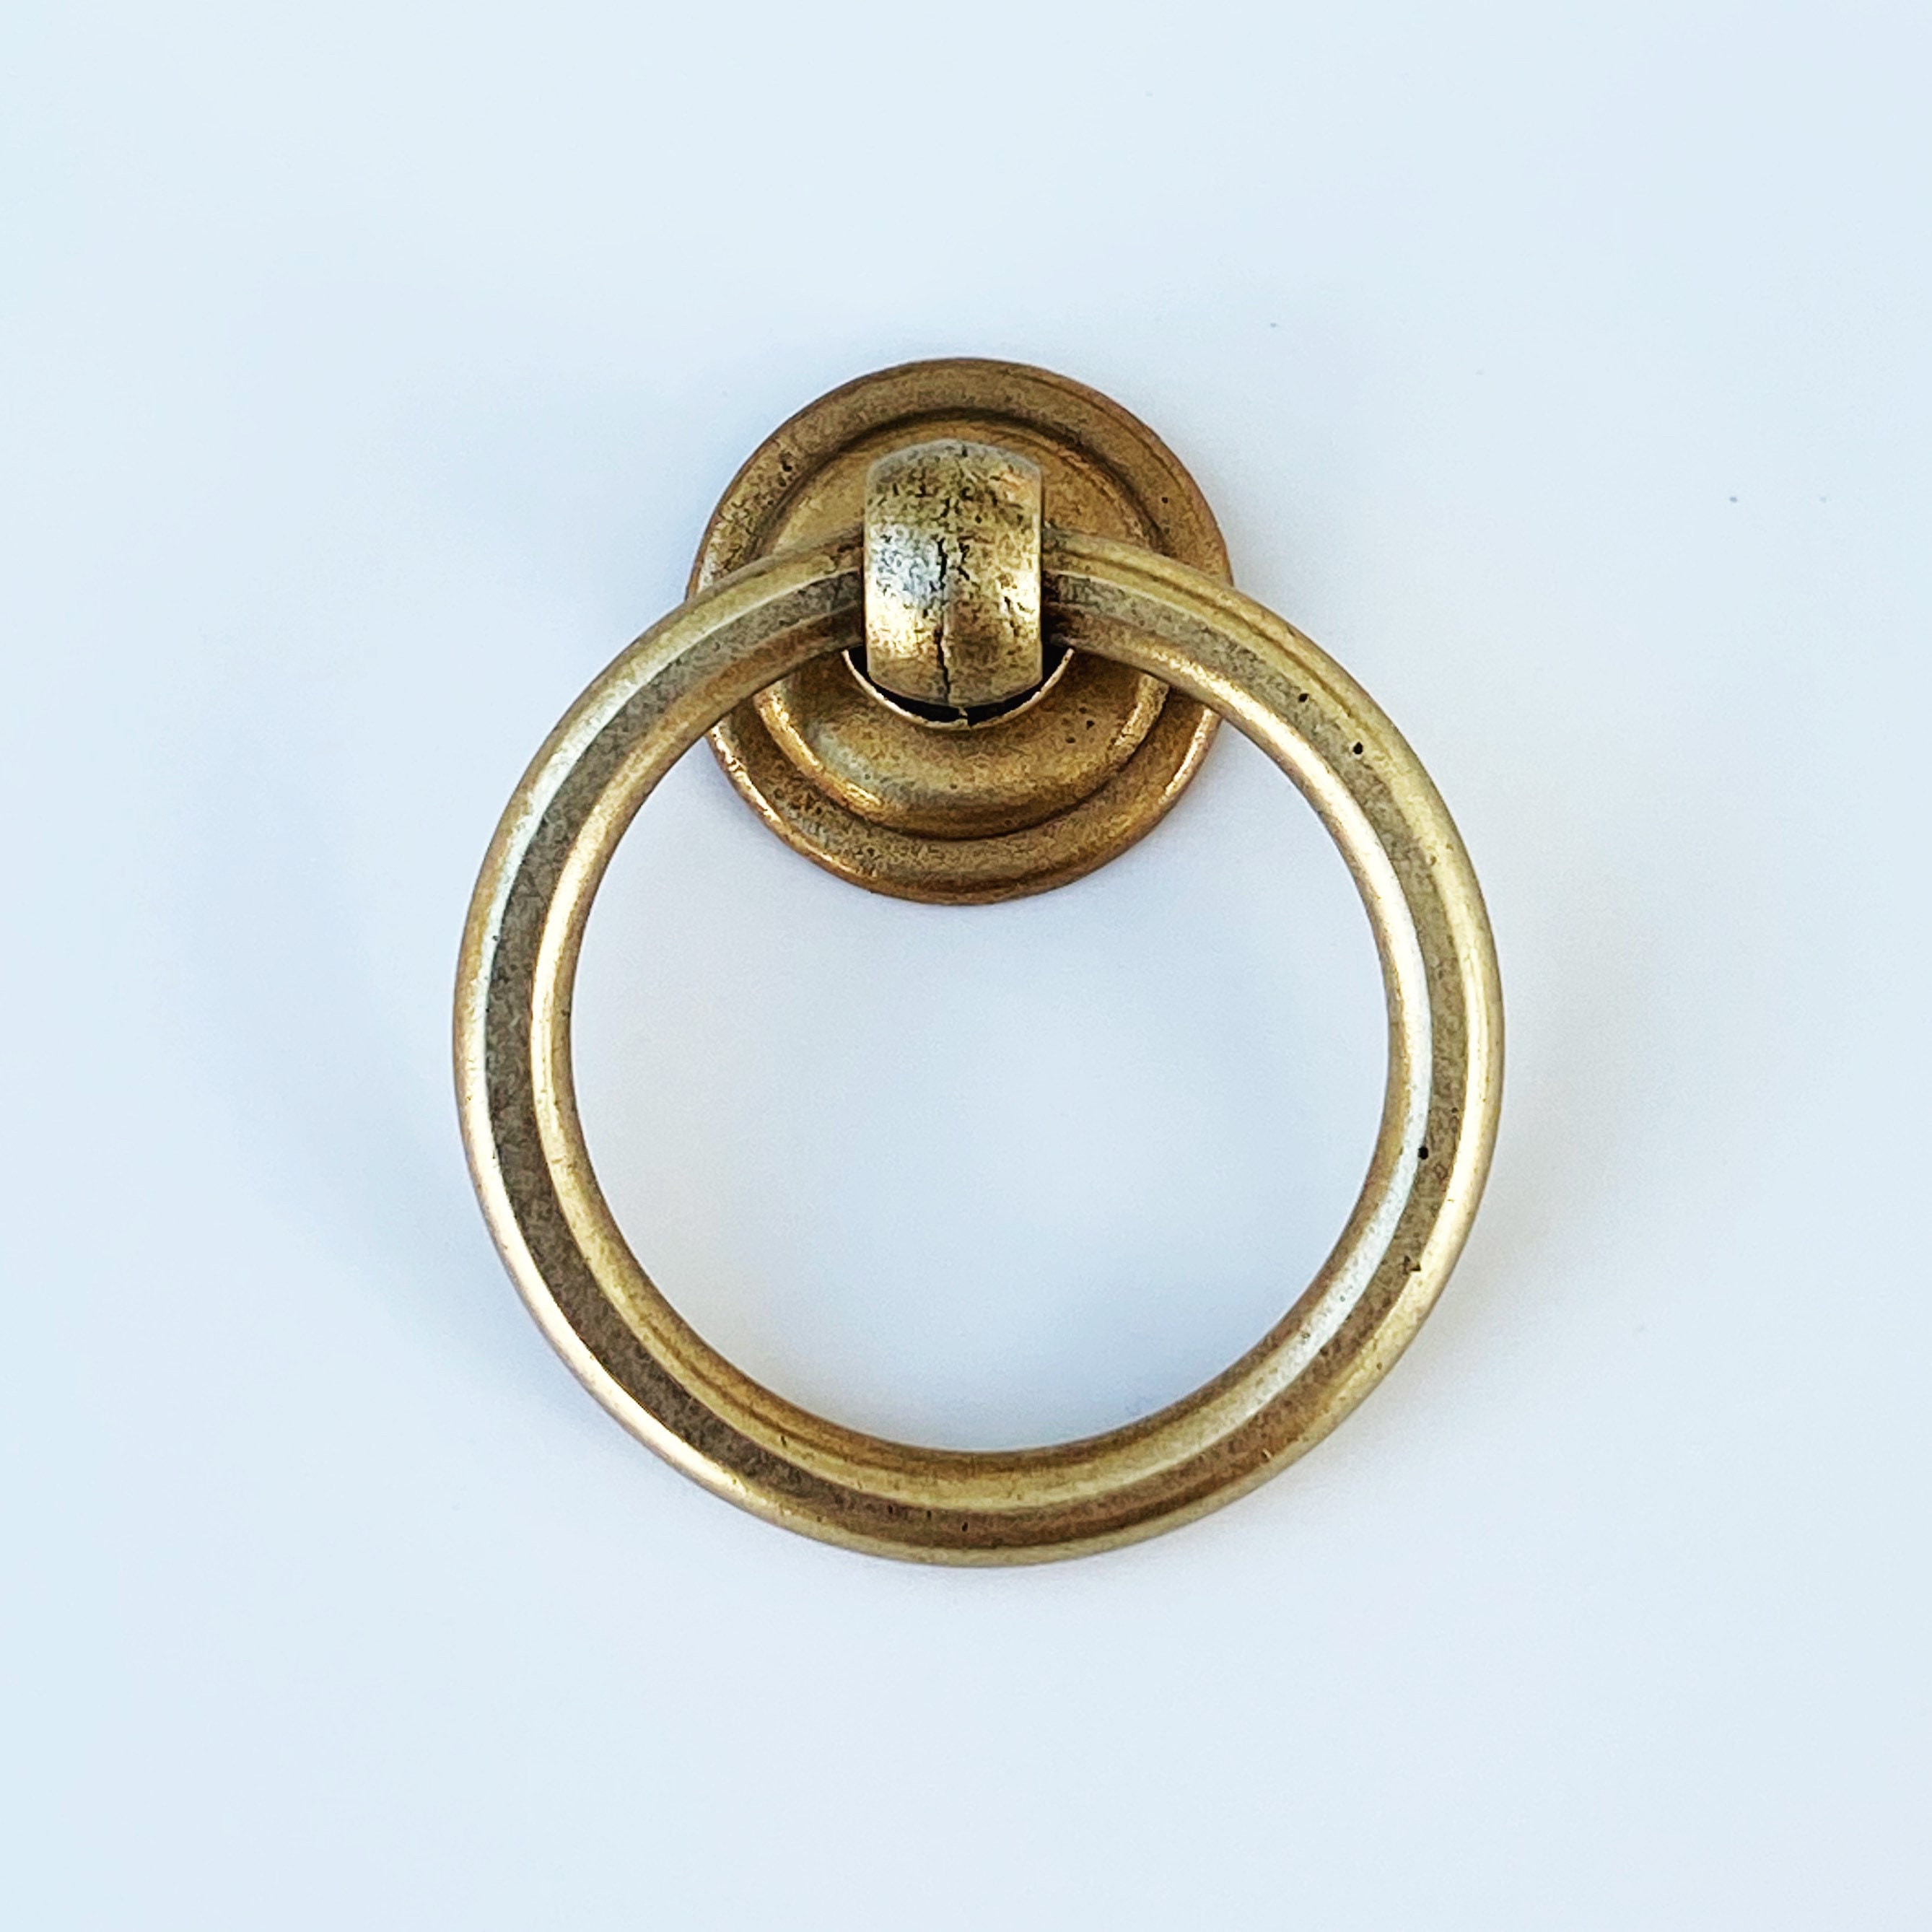 6 Pcs Cabinet Ring Pull Handle Cupboard Drawer Dresser Knobs Pull Handle  Antique Brass Φ55 (mm) : Amazon.in: Home & Kitchen